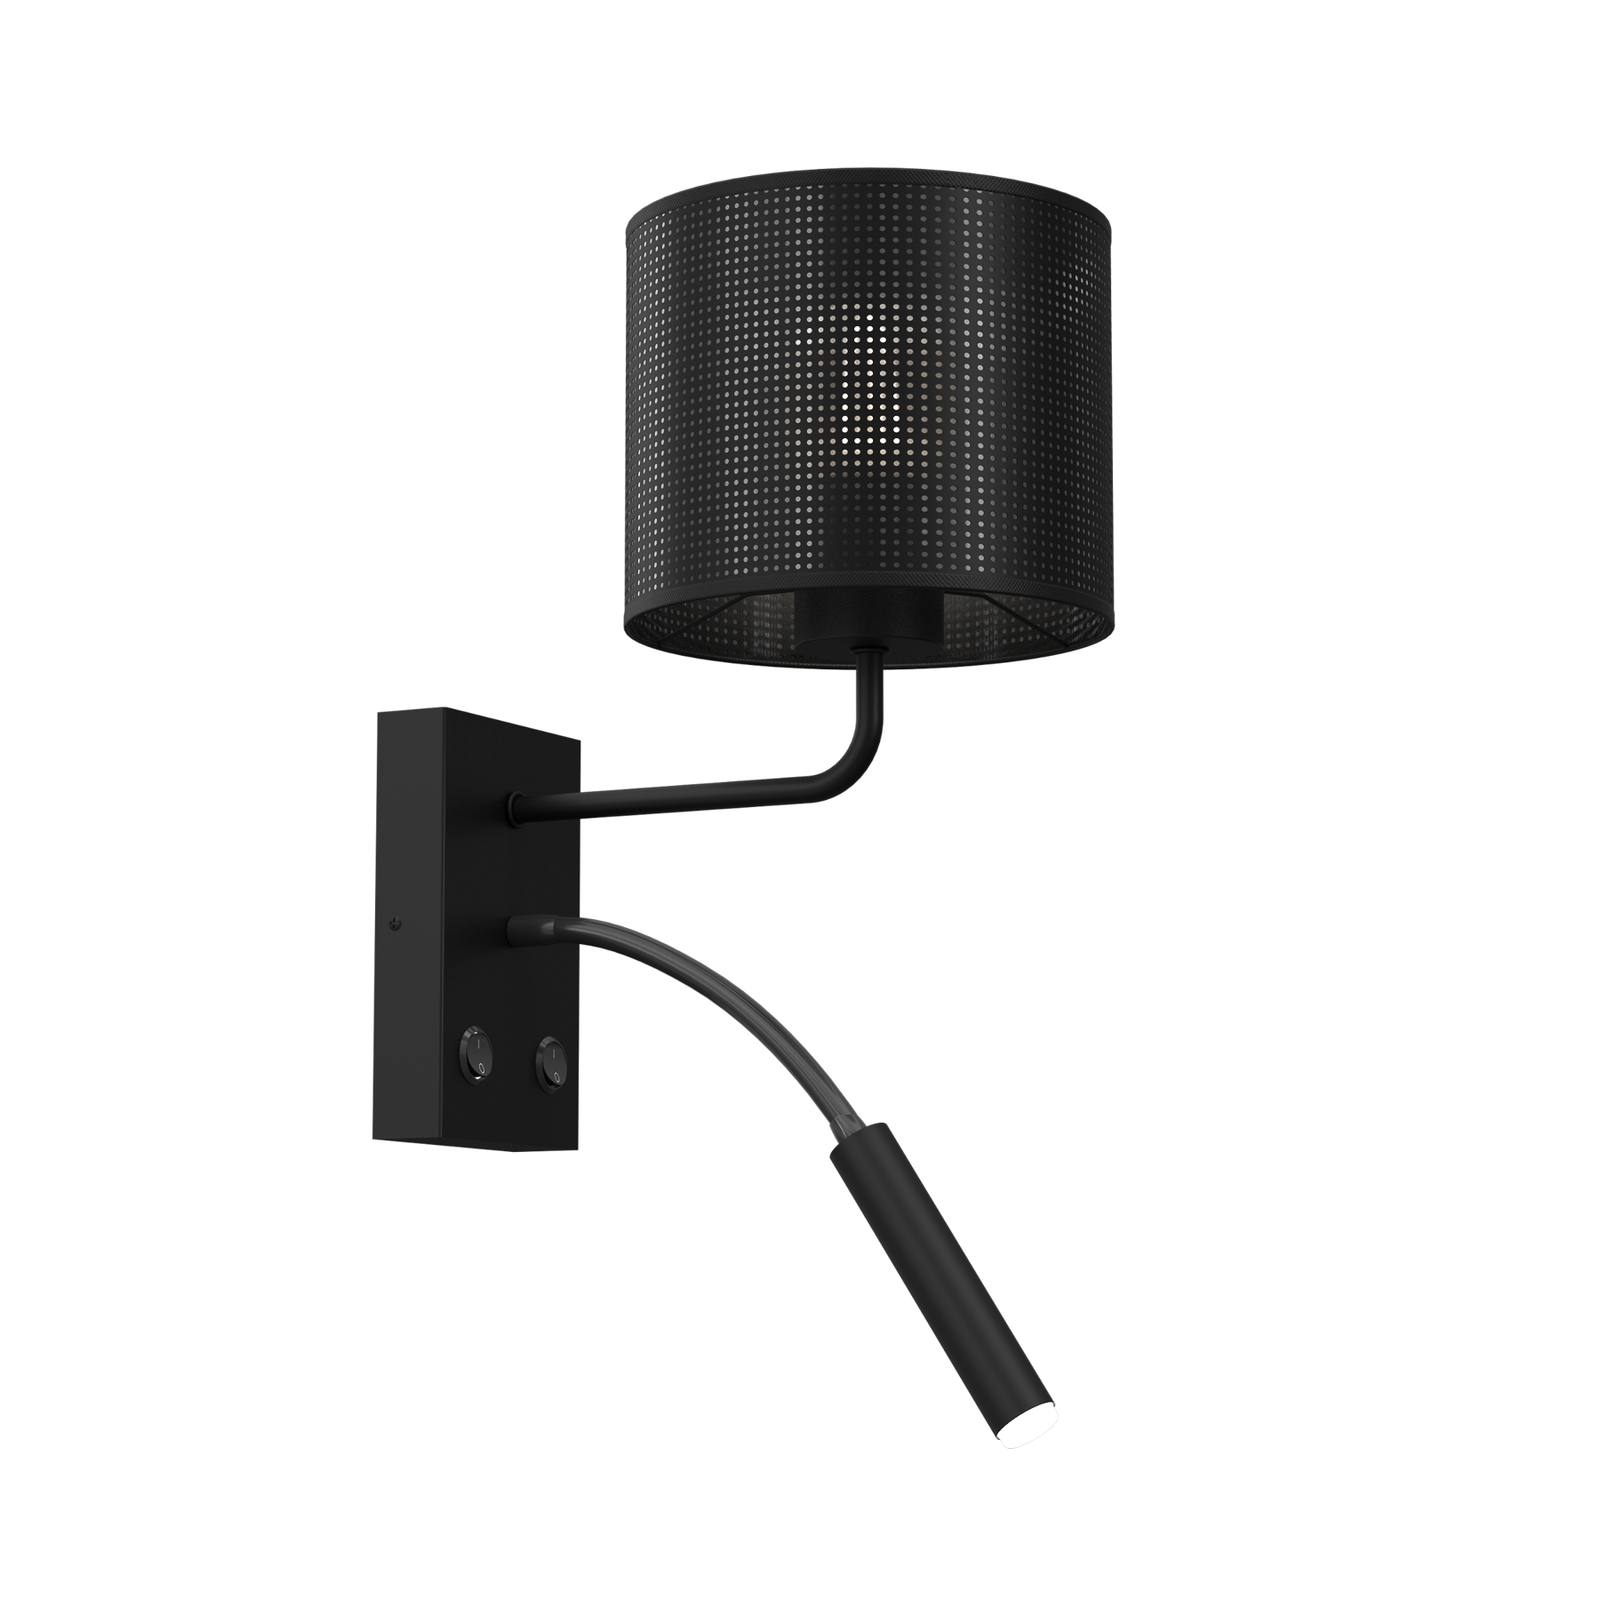 Jovin wall light one-bulb with a spot black